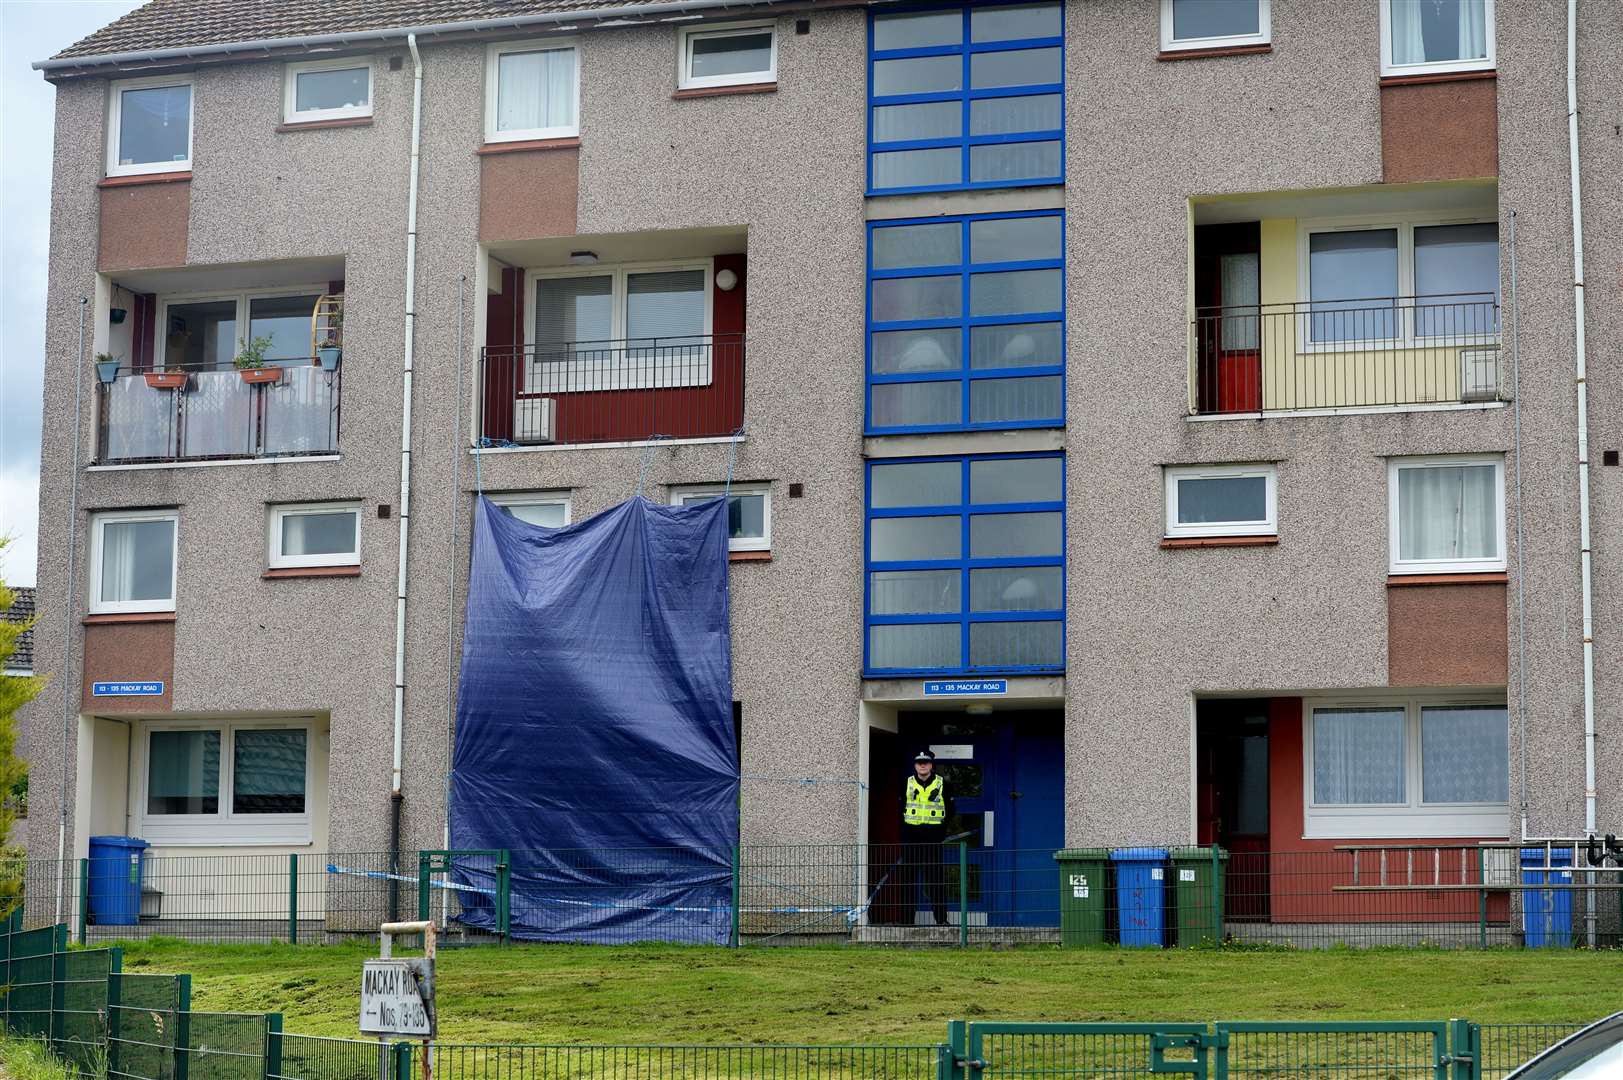 Flats at Mackay Road in Inverness were sealed off following the death of baby Mikayla in 2017.